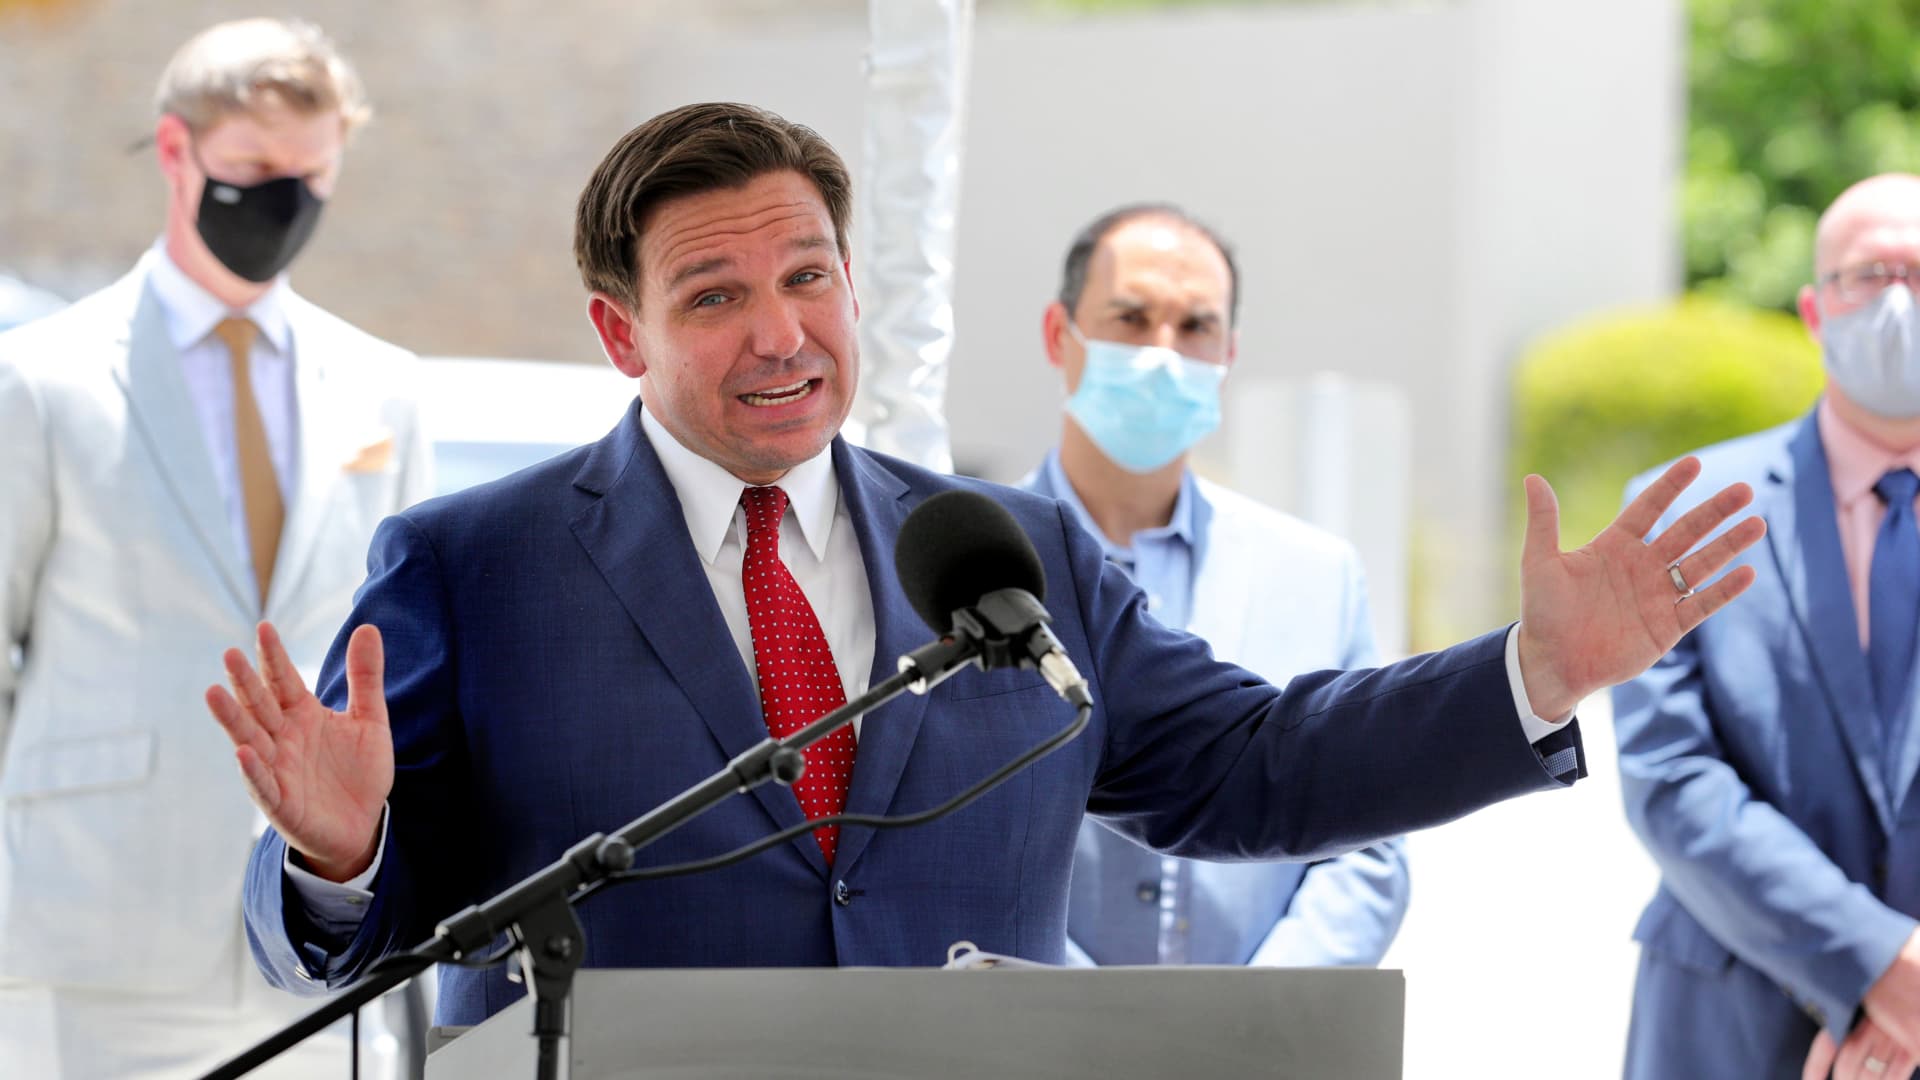 Florida Gov. Ron DeSantis gives an update on the state's response to the coronavirus pandemic during a press conference at Florida's Turnpike Turkey Lake Service Plaza, in Orlando, Friday, July 10, 2020.